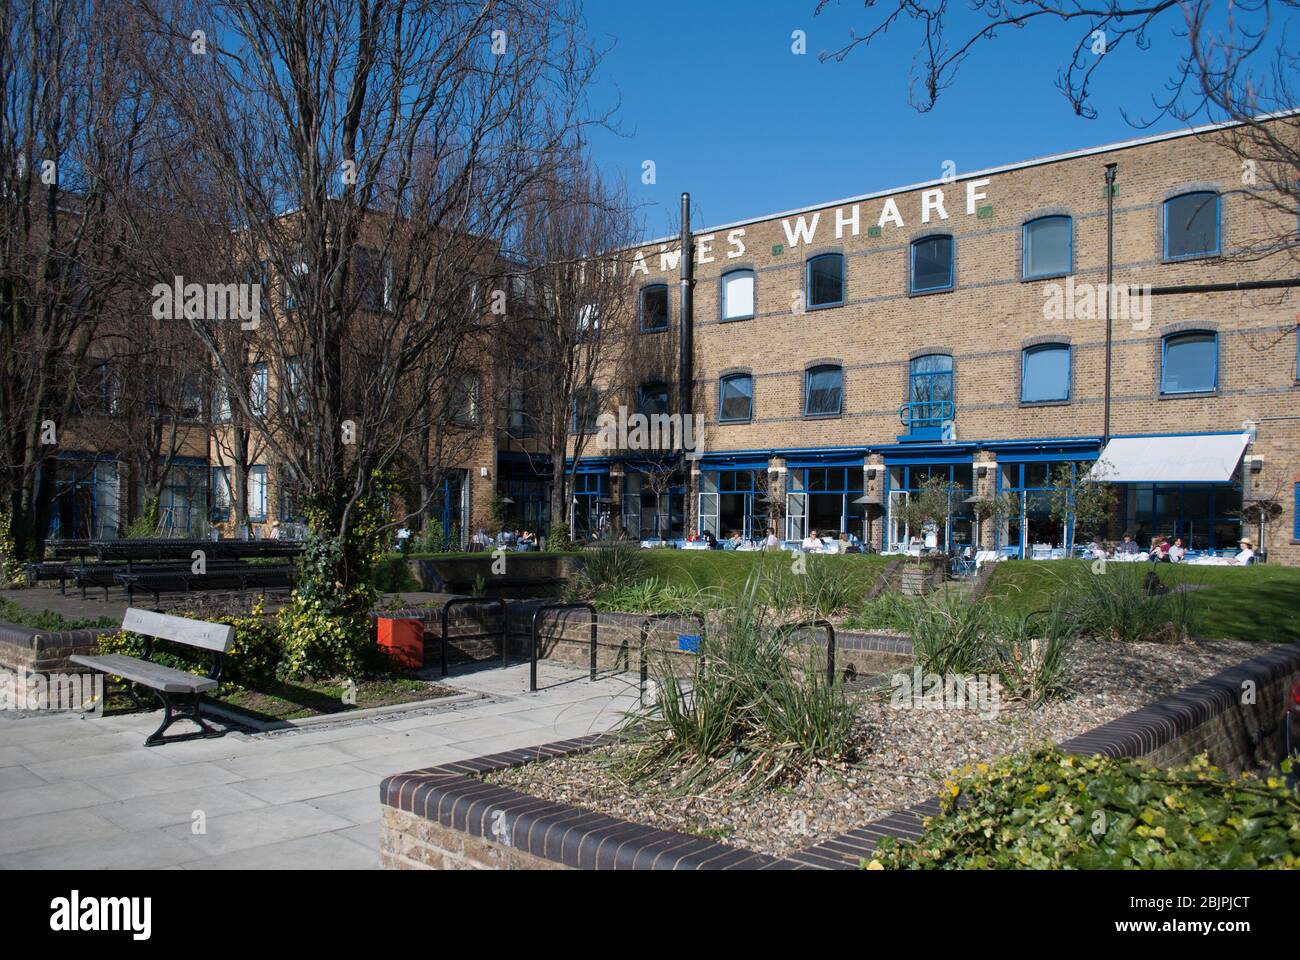 Terrace Gardens Thames Path Riverside Warehouse Oil Storage Converted River Cafe Thames Wharf, Rainville Road, Hammersmith, London Ruth Richard Rogers Stock Photo